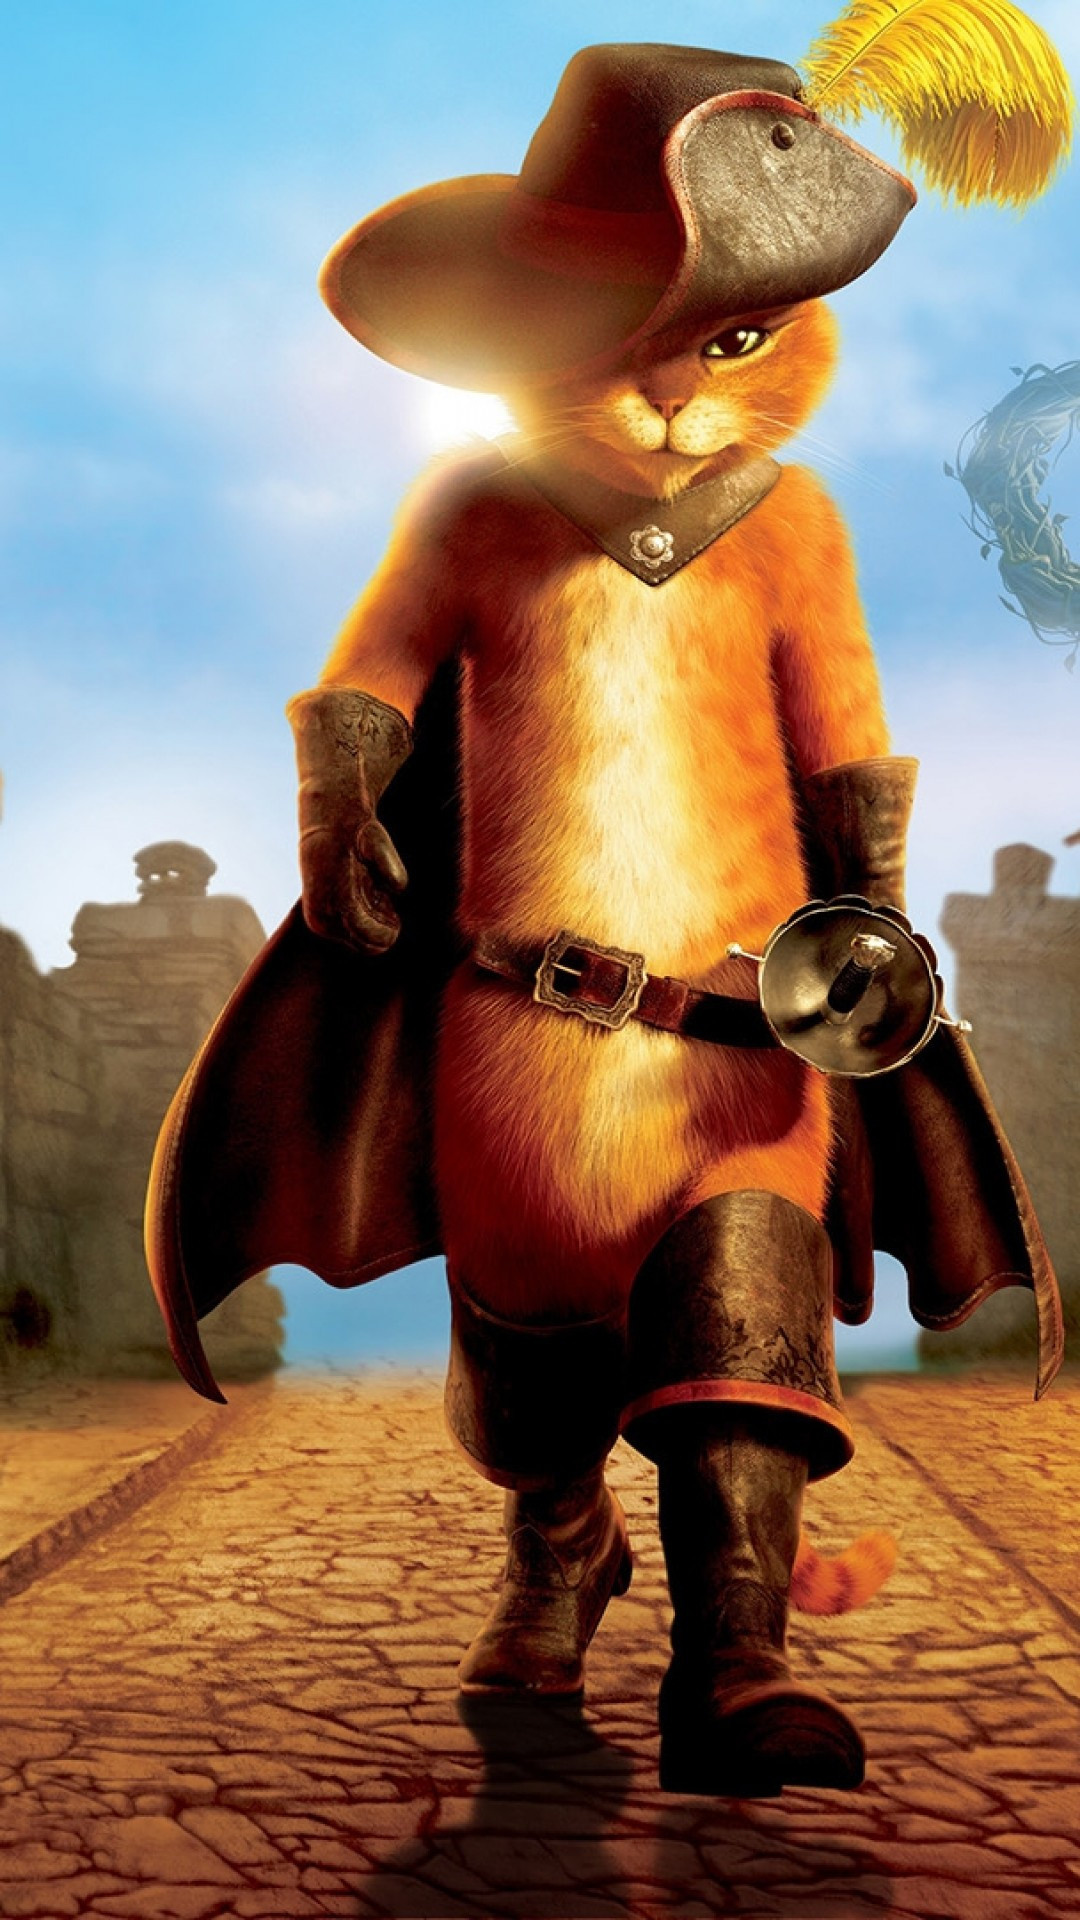 DreamWorks: High-quality family entertainment, Animated feature films, Puss In Boots. 1080x1920 Full HD Wallpaper.